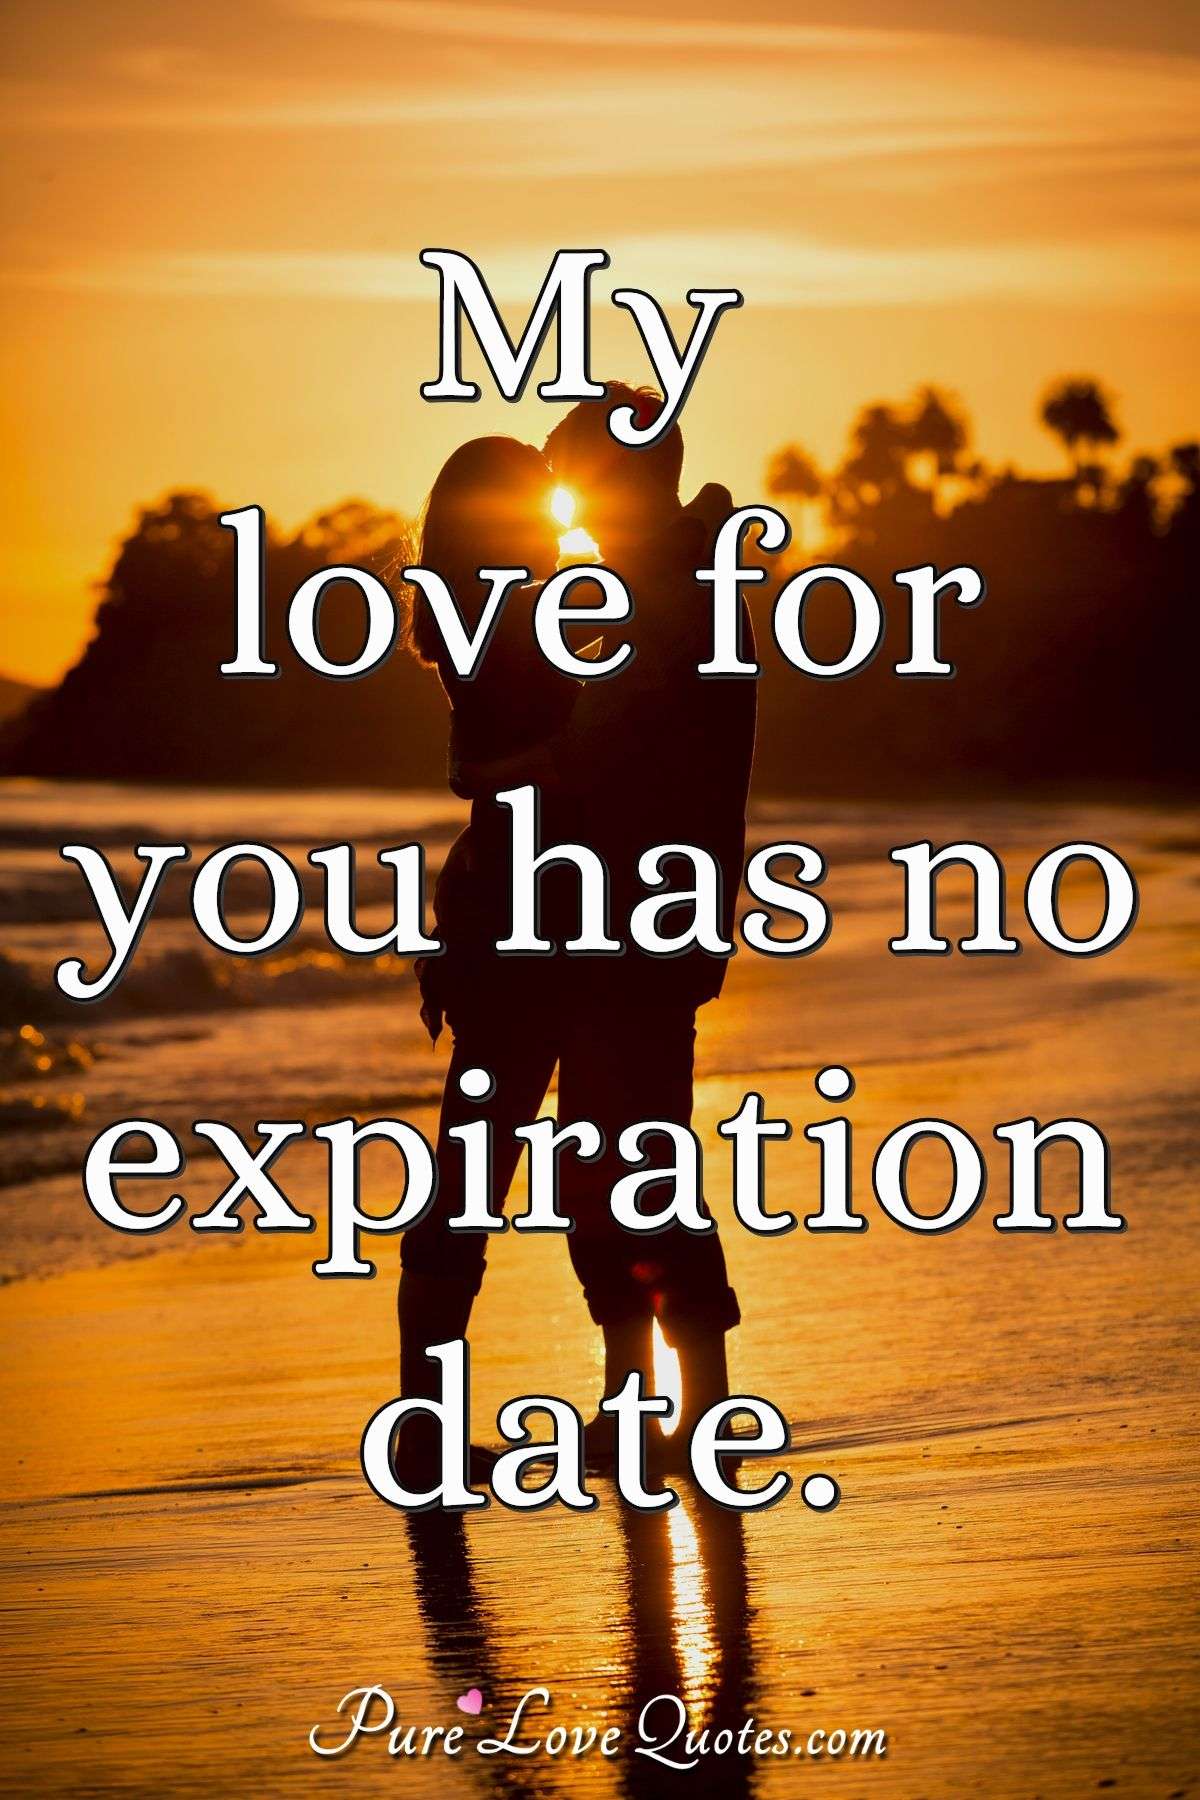 christian dating image quotes love relationships